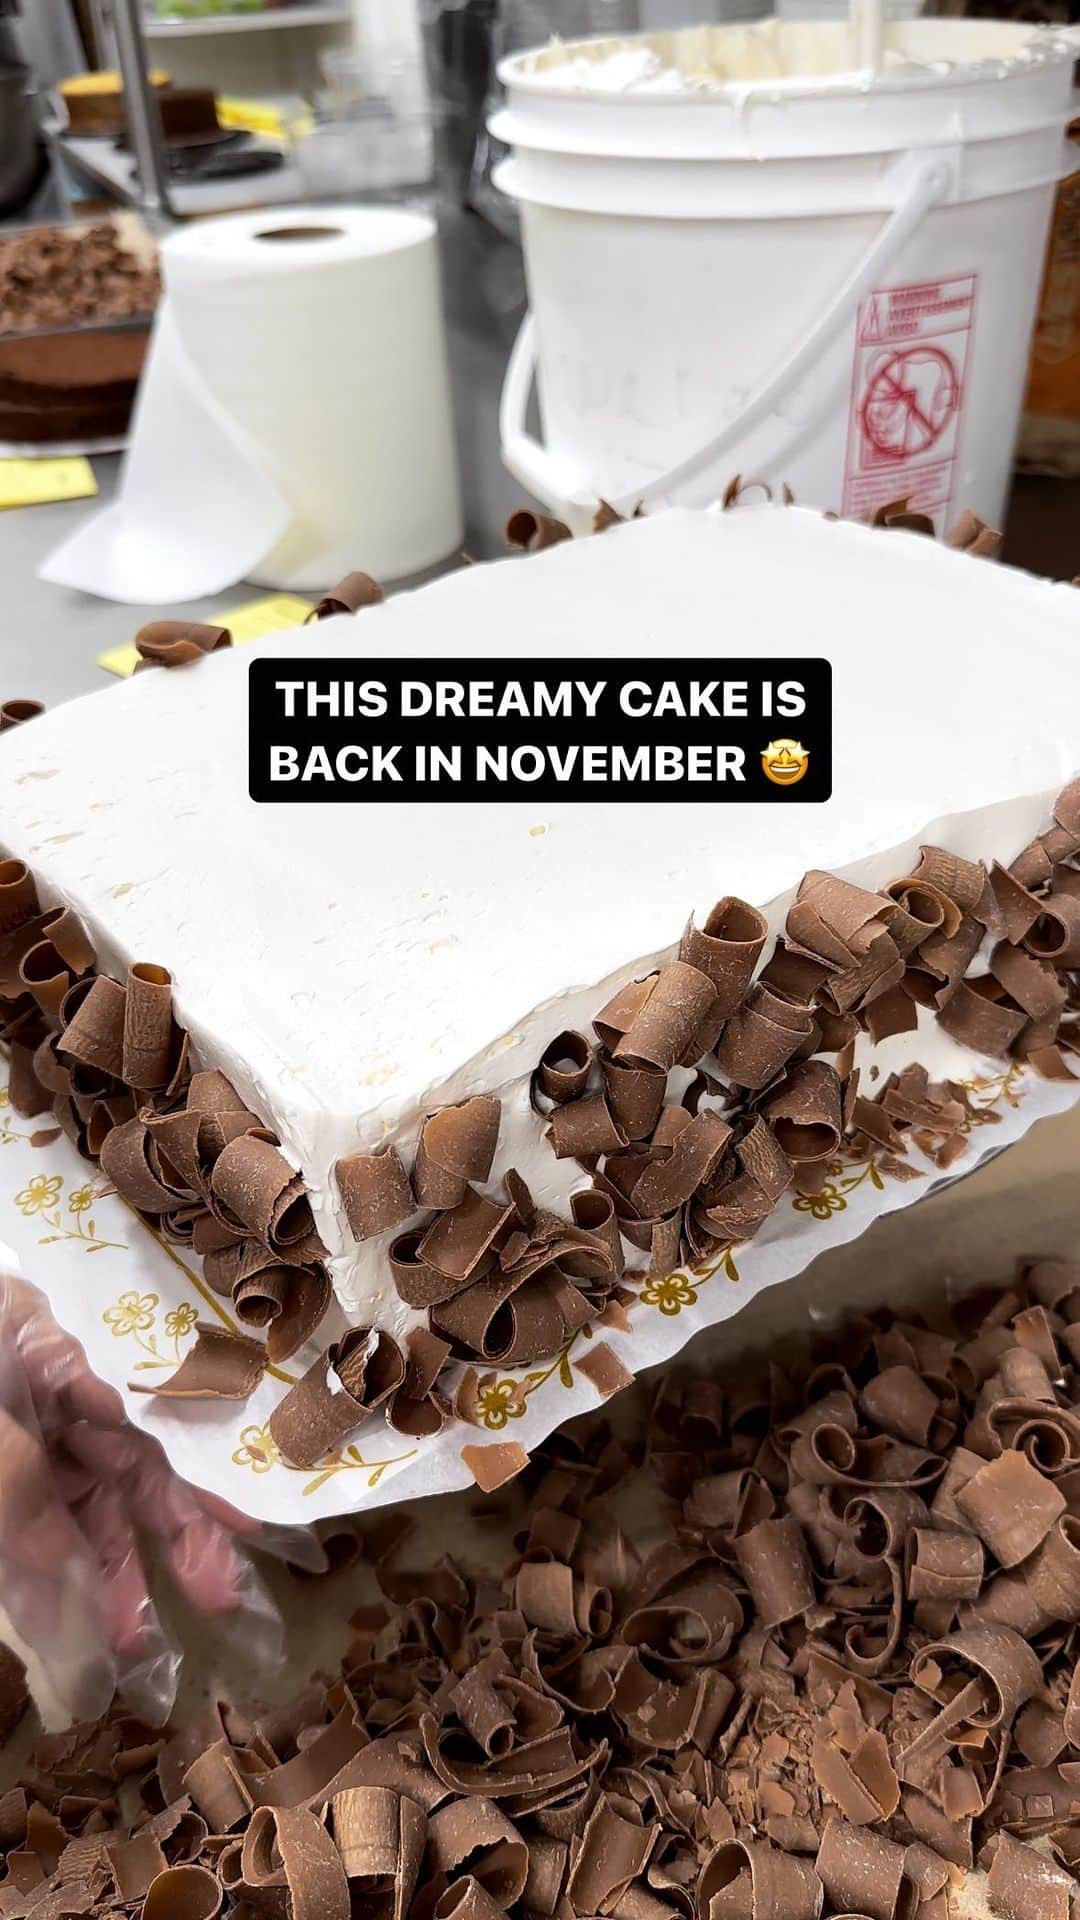 Zippy's Restaurantsのインスタグラム：「🤩THIS DREAMY CAKE IS BACK IN NOVEMBER 📍 @zippys    Heads up: this famous cake is coming back Nov. 22 and 23 only!  @zippys @napoleonsbakery DREAM CAKE will be available for purchase by the whole cake or by the slice. This 8-inch cake features three layers of chocolate chiffon interspersed with layers of whipped cream.   🍫The dream cake is frosted with whipped cream and garnished with handmade milk chocolate shavings. Yes, the delicate curls are hand-shaven from huge chocolate bars — they’re not from a machine!   Tag someone who loves this chocolate cake 🍰」